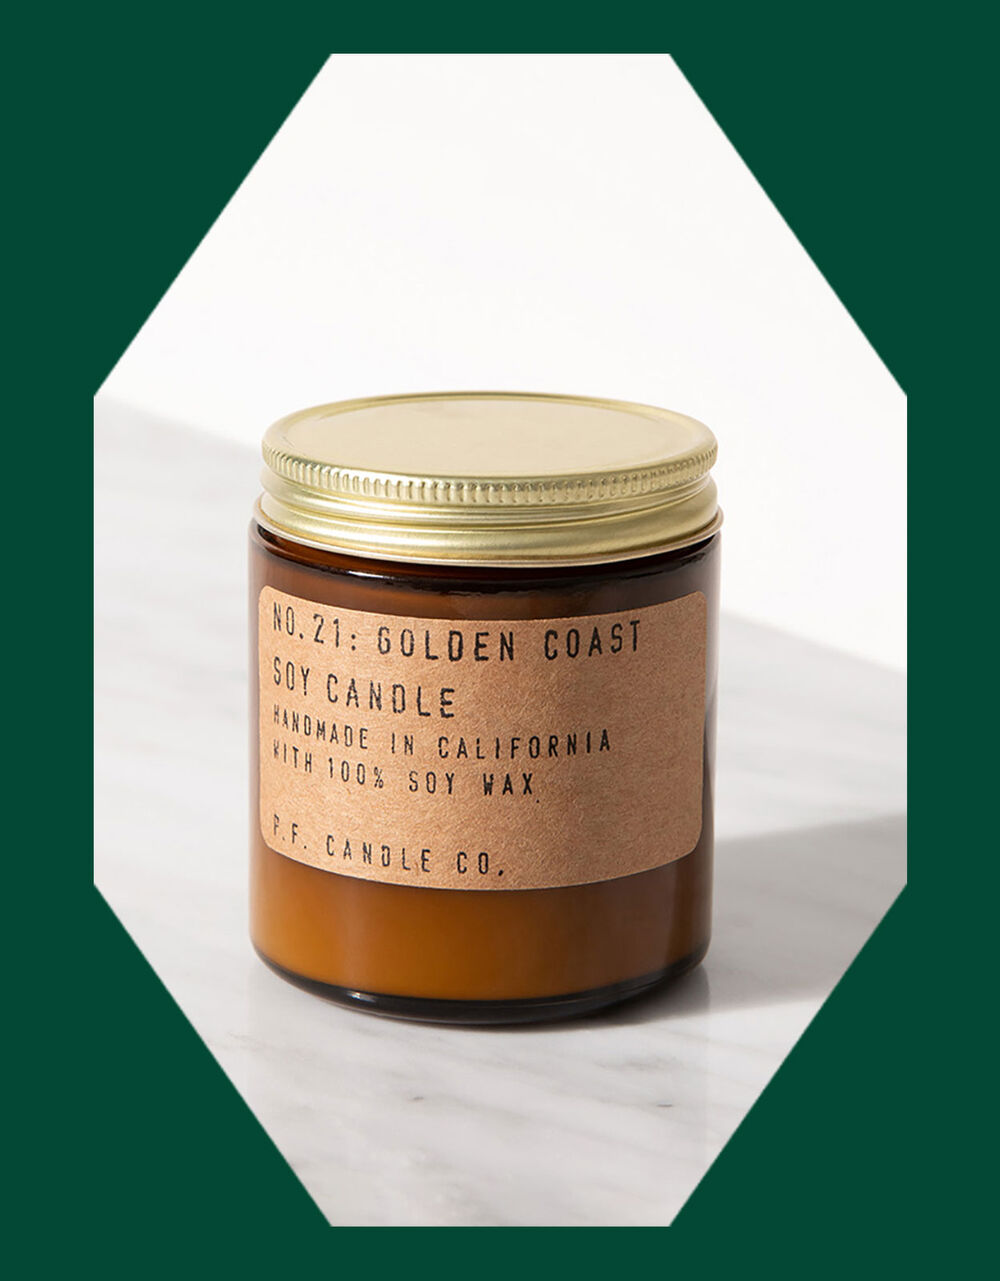 Women Home & Gifting | P.F. Candle Co. Golden Coast Soy Candle - DB54616